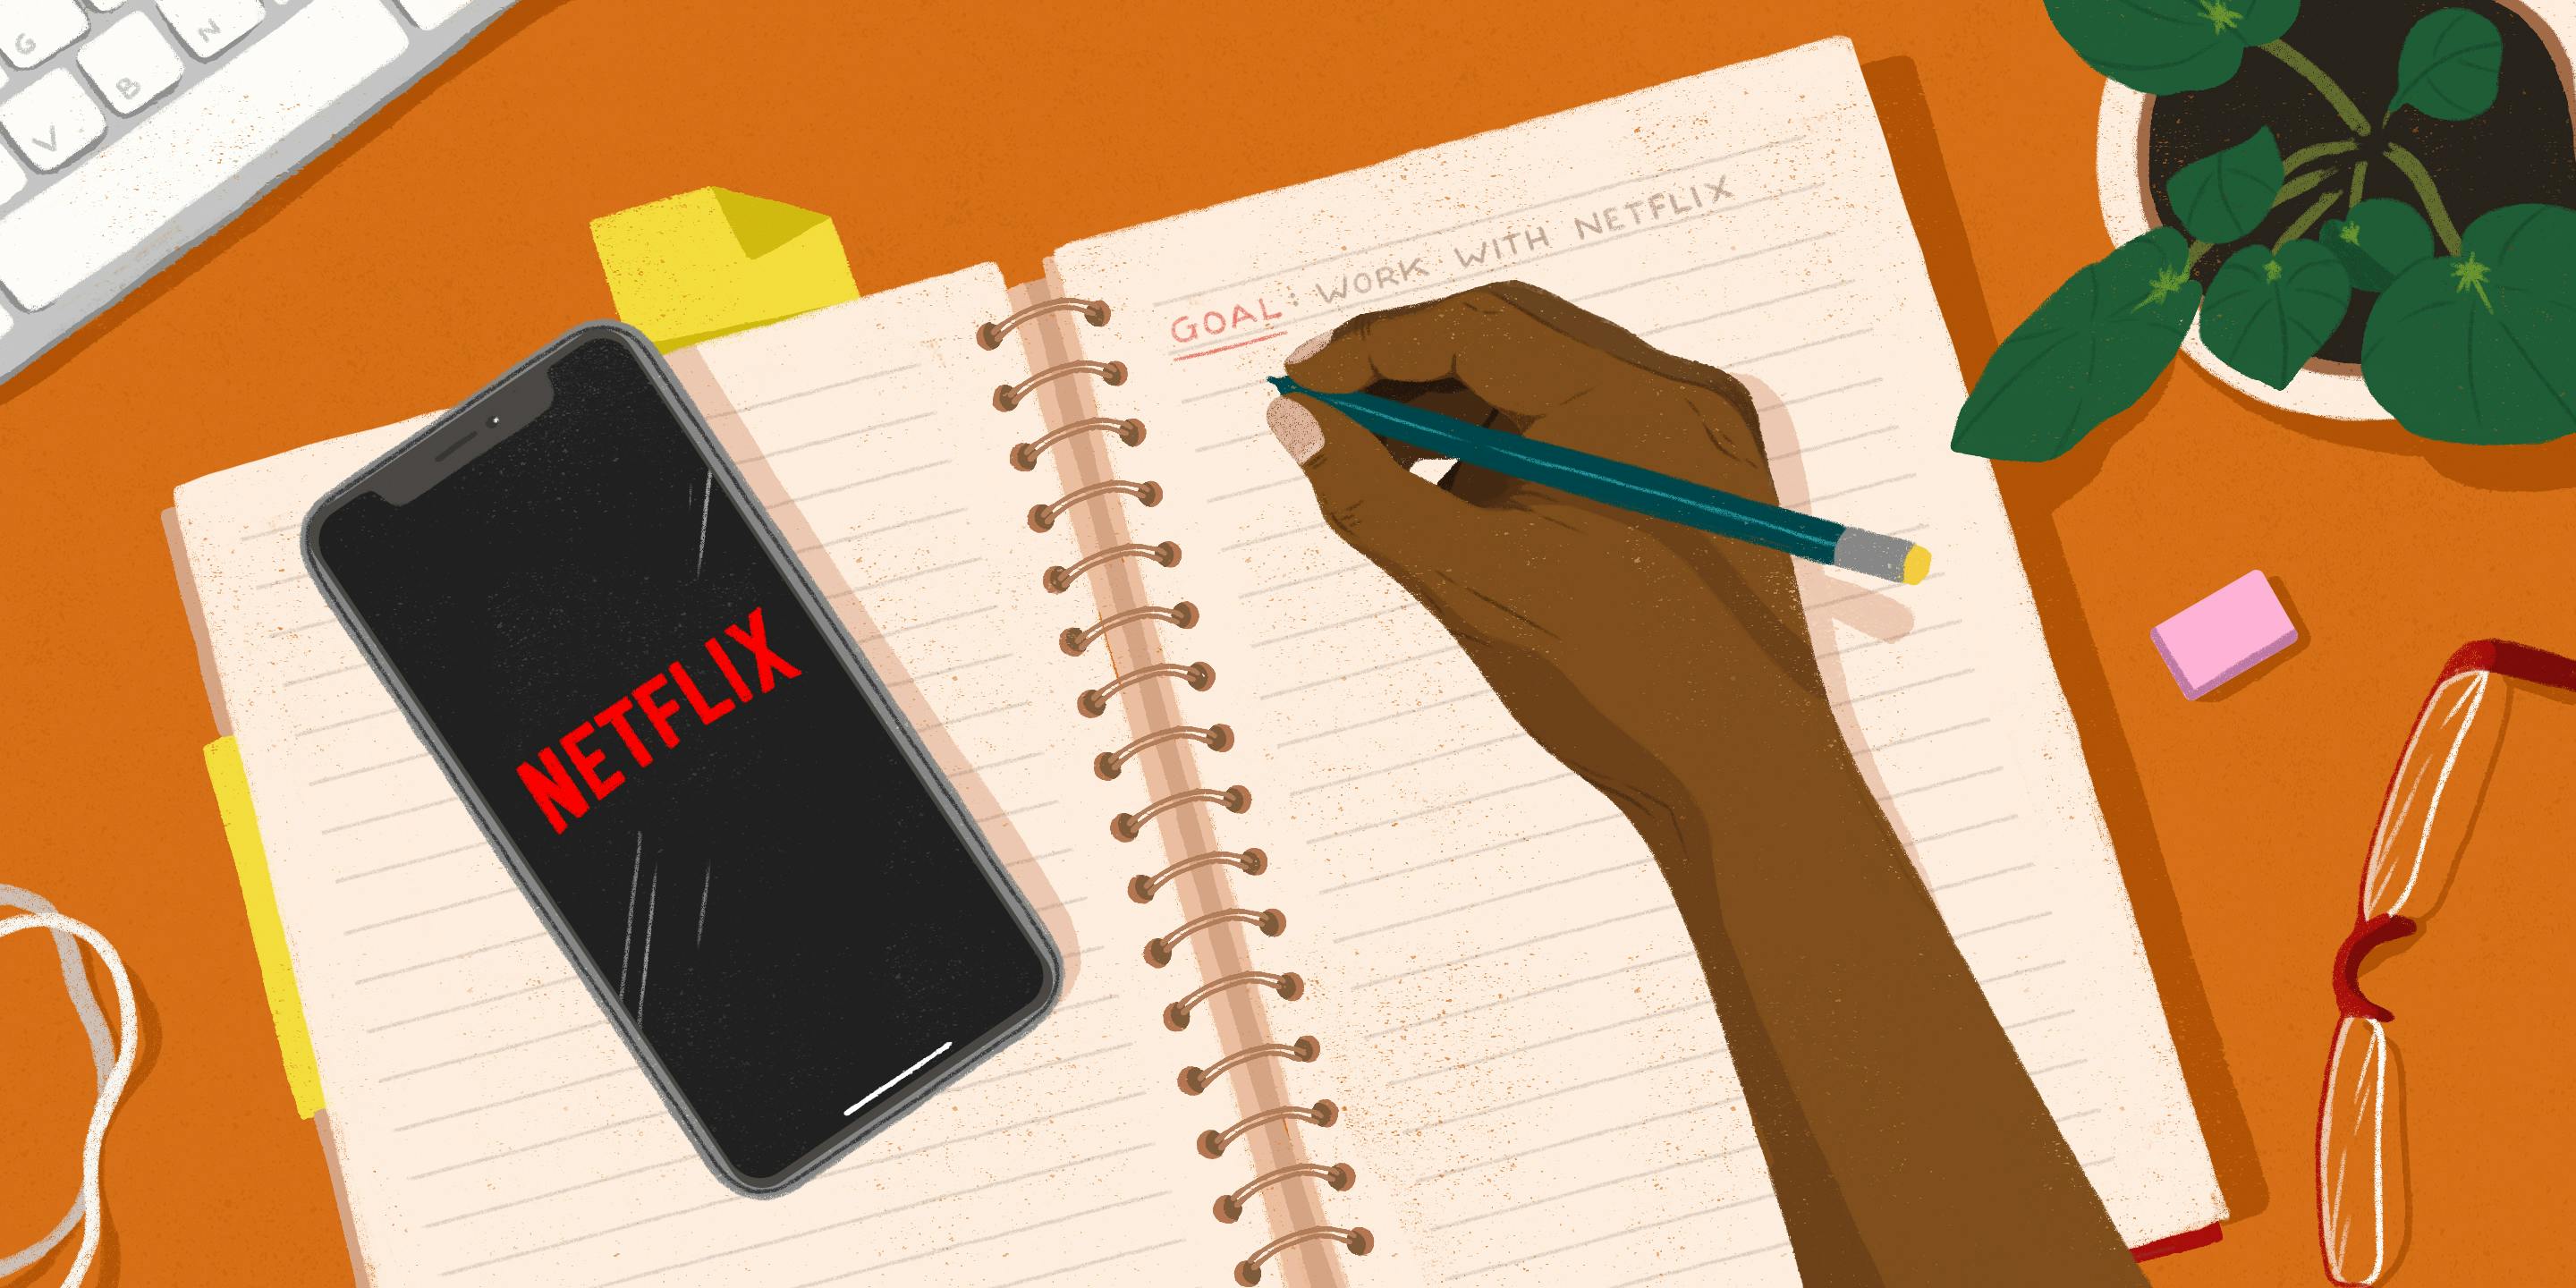 Working with Netflix by Suzanne Dias